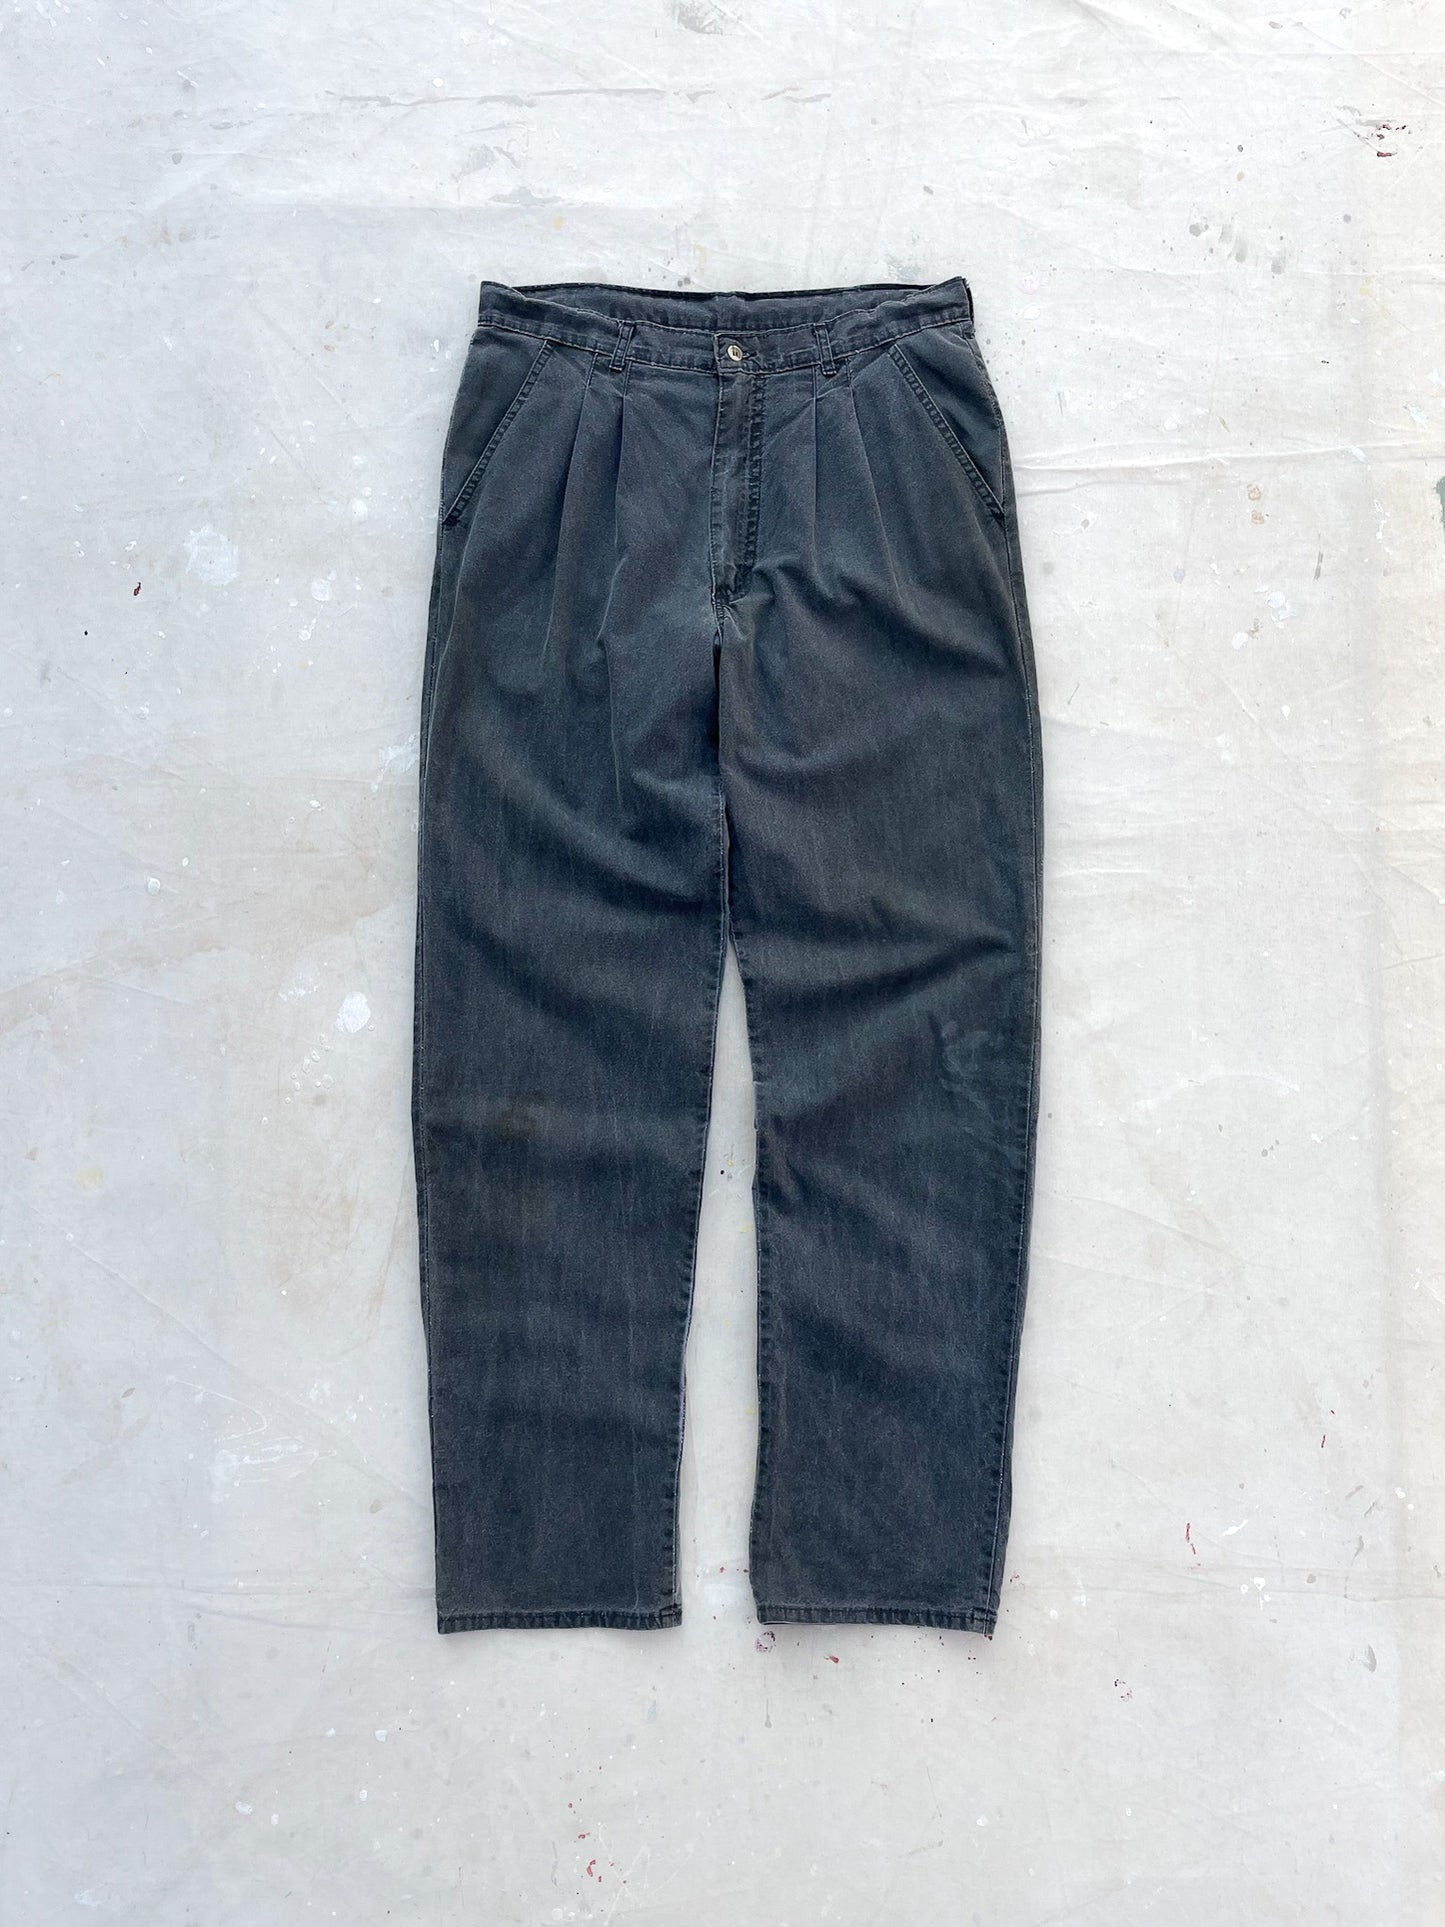 Woolrich Pleated Pants—[33x33]